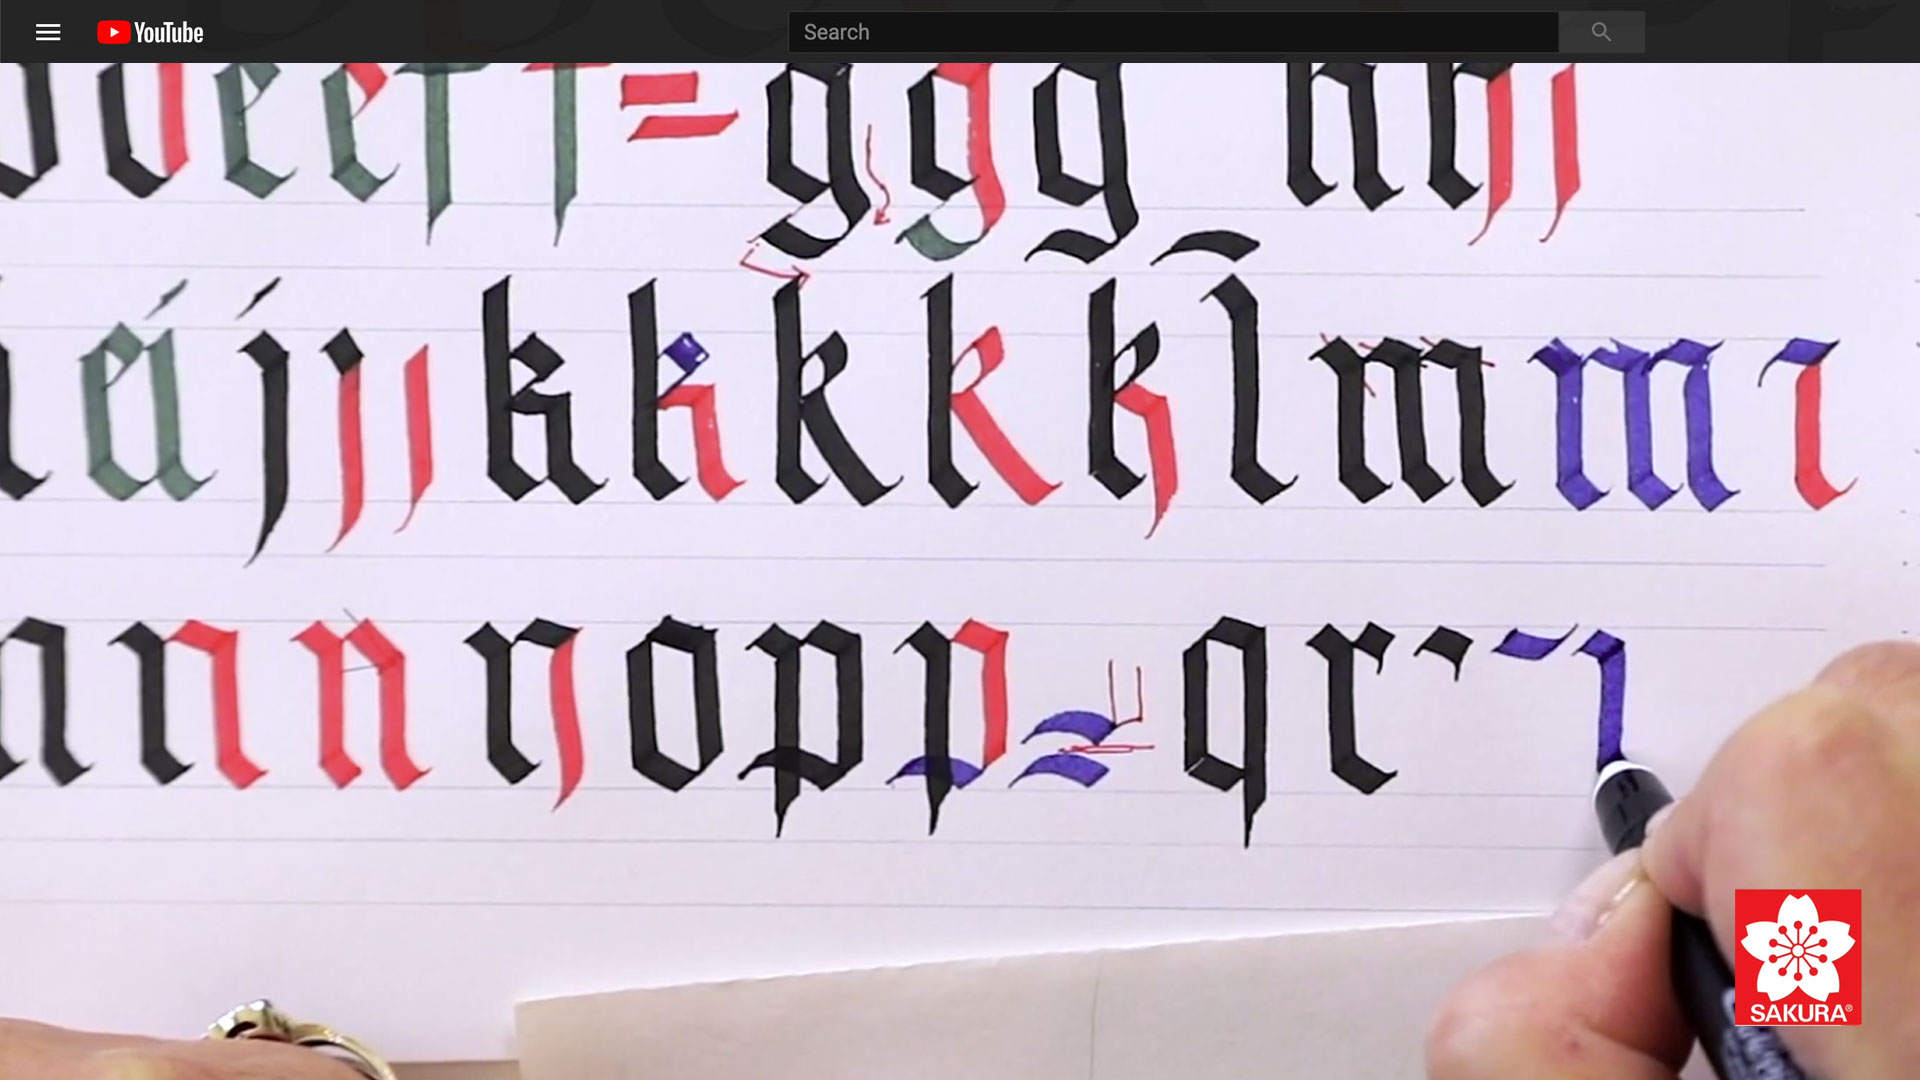 Black Letter Gothic Calligraphy Lowercase Letters n-z with Janet Takahashi